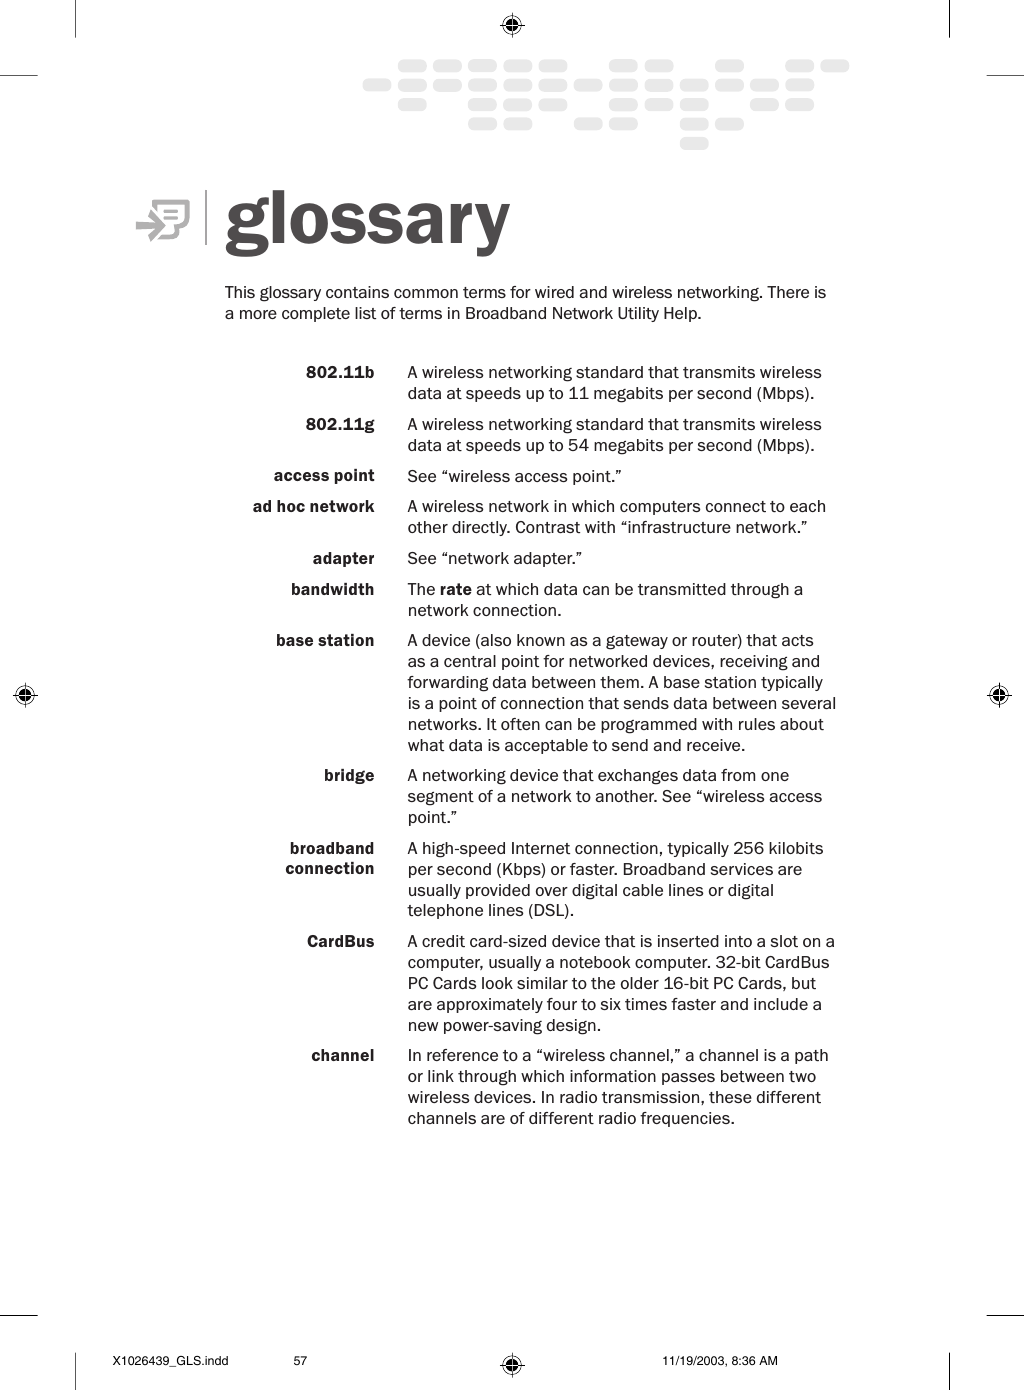 glossary This glossary contains common terms for wired and wireless networking. There is a more complete list of terms in Broadband Network Utility Help. 802.11b A wireless networking standard that transmits wireless data at speeds up to 11 megabits per second (Mbps). 802.11g A wireless networking standard that transmits wireless data at speeds up to 54 megabits per second (Mbps). access point See “wireless access point.” ad hoc network A wireless network in which computers connect to each other directly. Contrast with “infrastructure network.”adapter See “network adapter.” bandwidth The rate at which data can be transmitted through a network connection. base station A device (also known as a gateway or router) that acts as a central point for networked devices, receiving and forwarding data between them. A base station typically is a point of connection that sends data between several networks. It often can be programmed with rules about what data is acceptable to send and receive.bridge A networking device that exchanges data from one segment of a network to another. See “wireless access point.”broadband connectionA high-speed Internet connection, typically 256 kilobits per second (Kbps) or faster. Broadband services are usually provided over digital cable lines or digital telephone lines (DSL).CardBus A credit card-sized device that is inserted into a slot on a computer, usually a notebook computer. 32-bit CardBus PC Cards look similar to the older 16-bit PC Cards, but are approximately four to six times faster and include a new power-saving design.channel In reference to a “wireless channel,” a channel is a path or link through which information passes between two wireless devices. In radio transmission, these different channels are of different radio frequencies. X1026439_GLS.indd 11/19/2003, 8:36 AM57